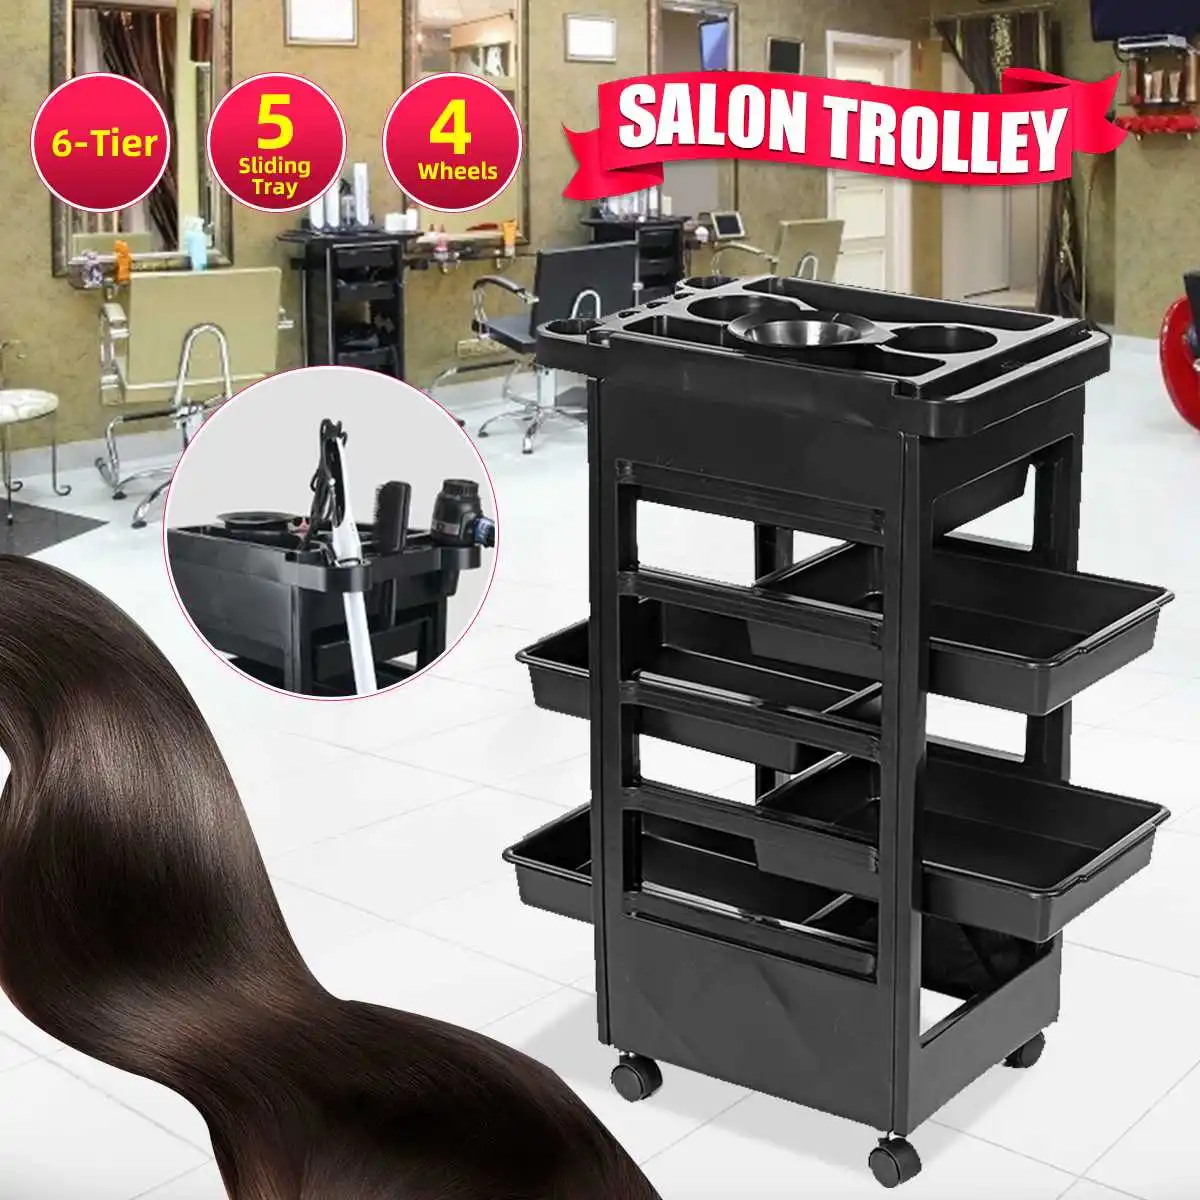 

6-Tier Salon Hairdresser Storage Trolley Hair Drawers Coloring Cart Spa Salon Styling Trolley Rollers Barber Beauty Tools